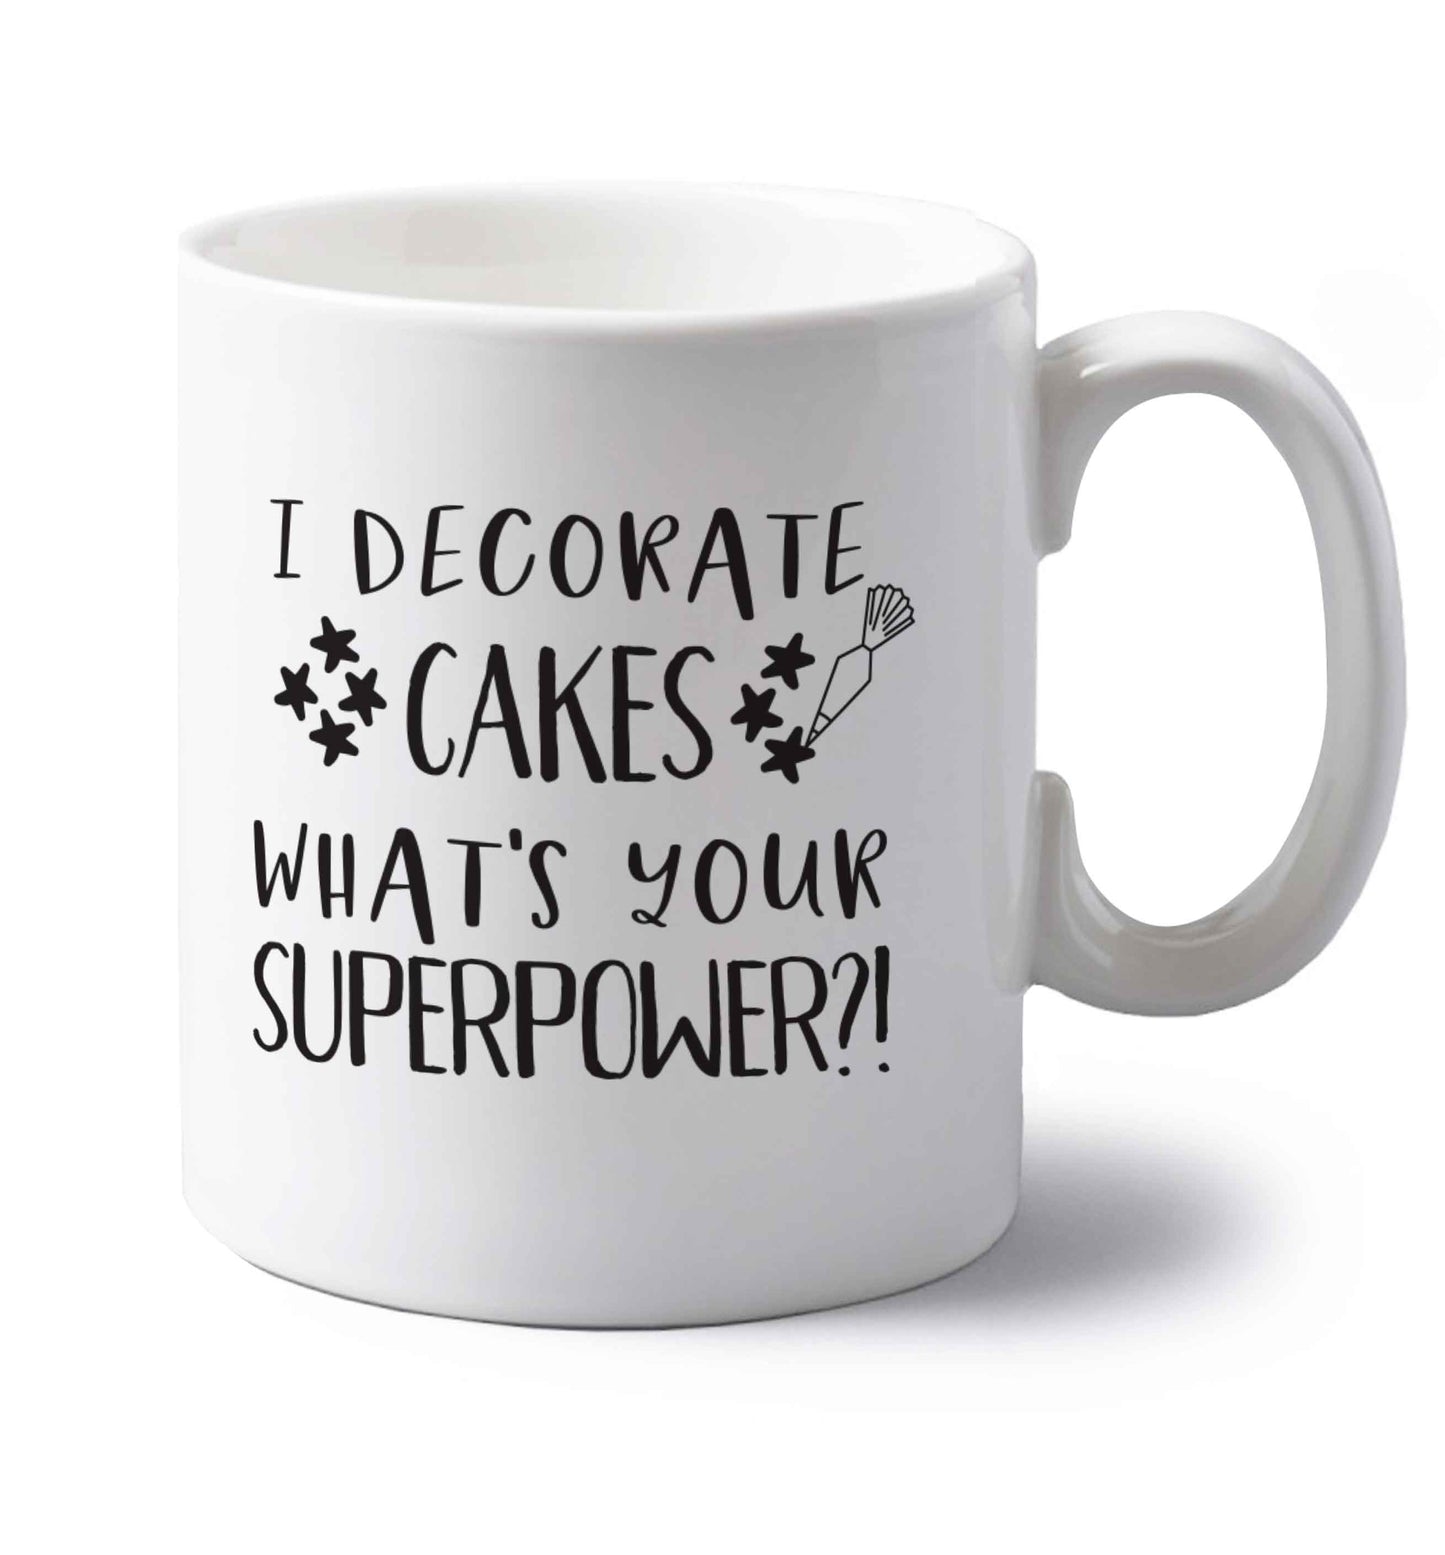 I decorate cakes what's your superpower?! left handed white ceramic mug 